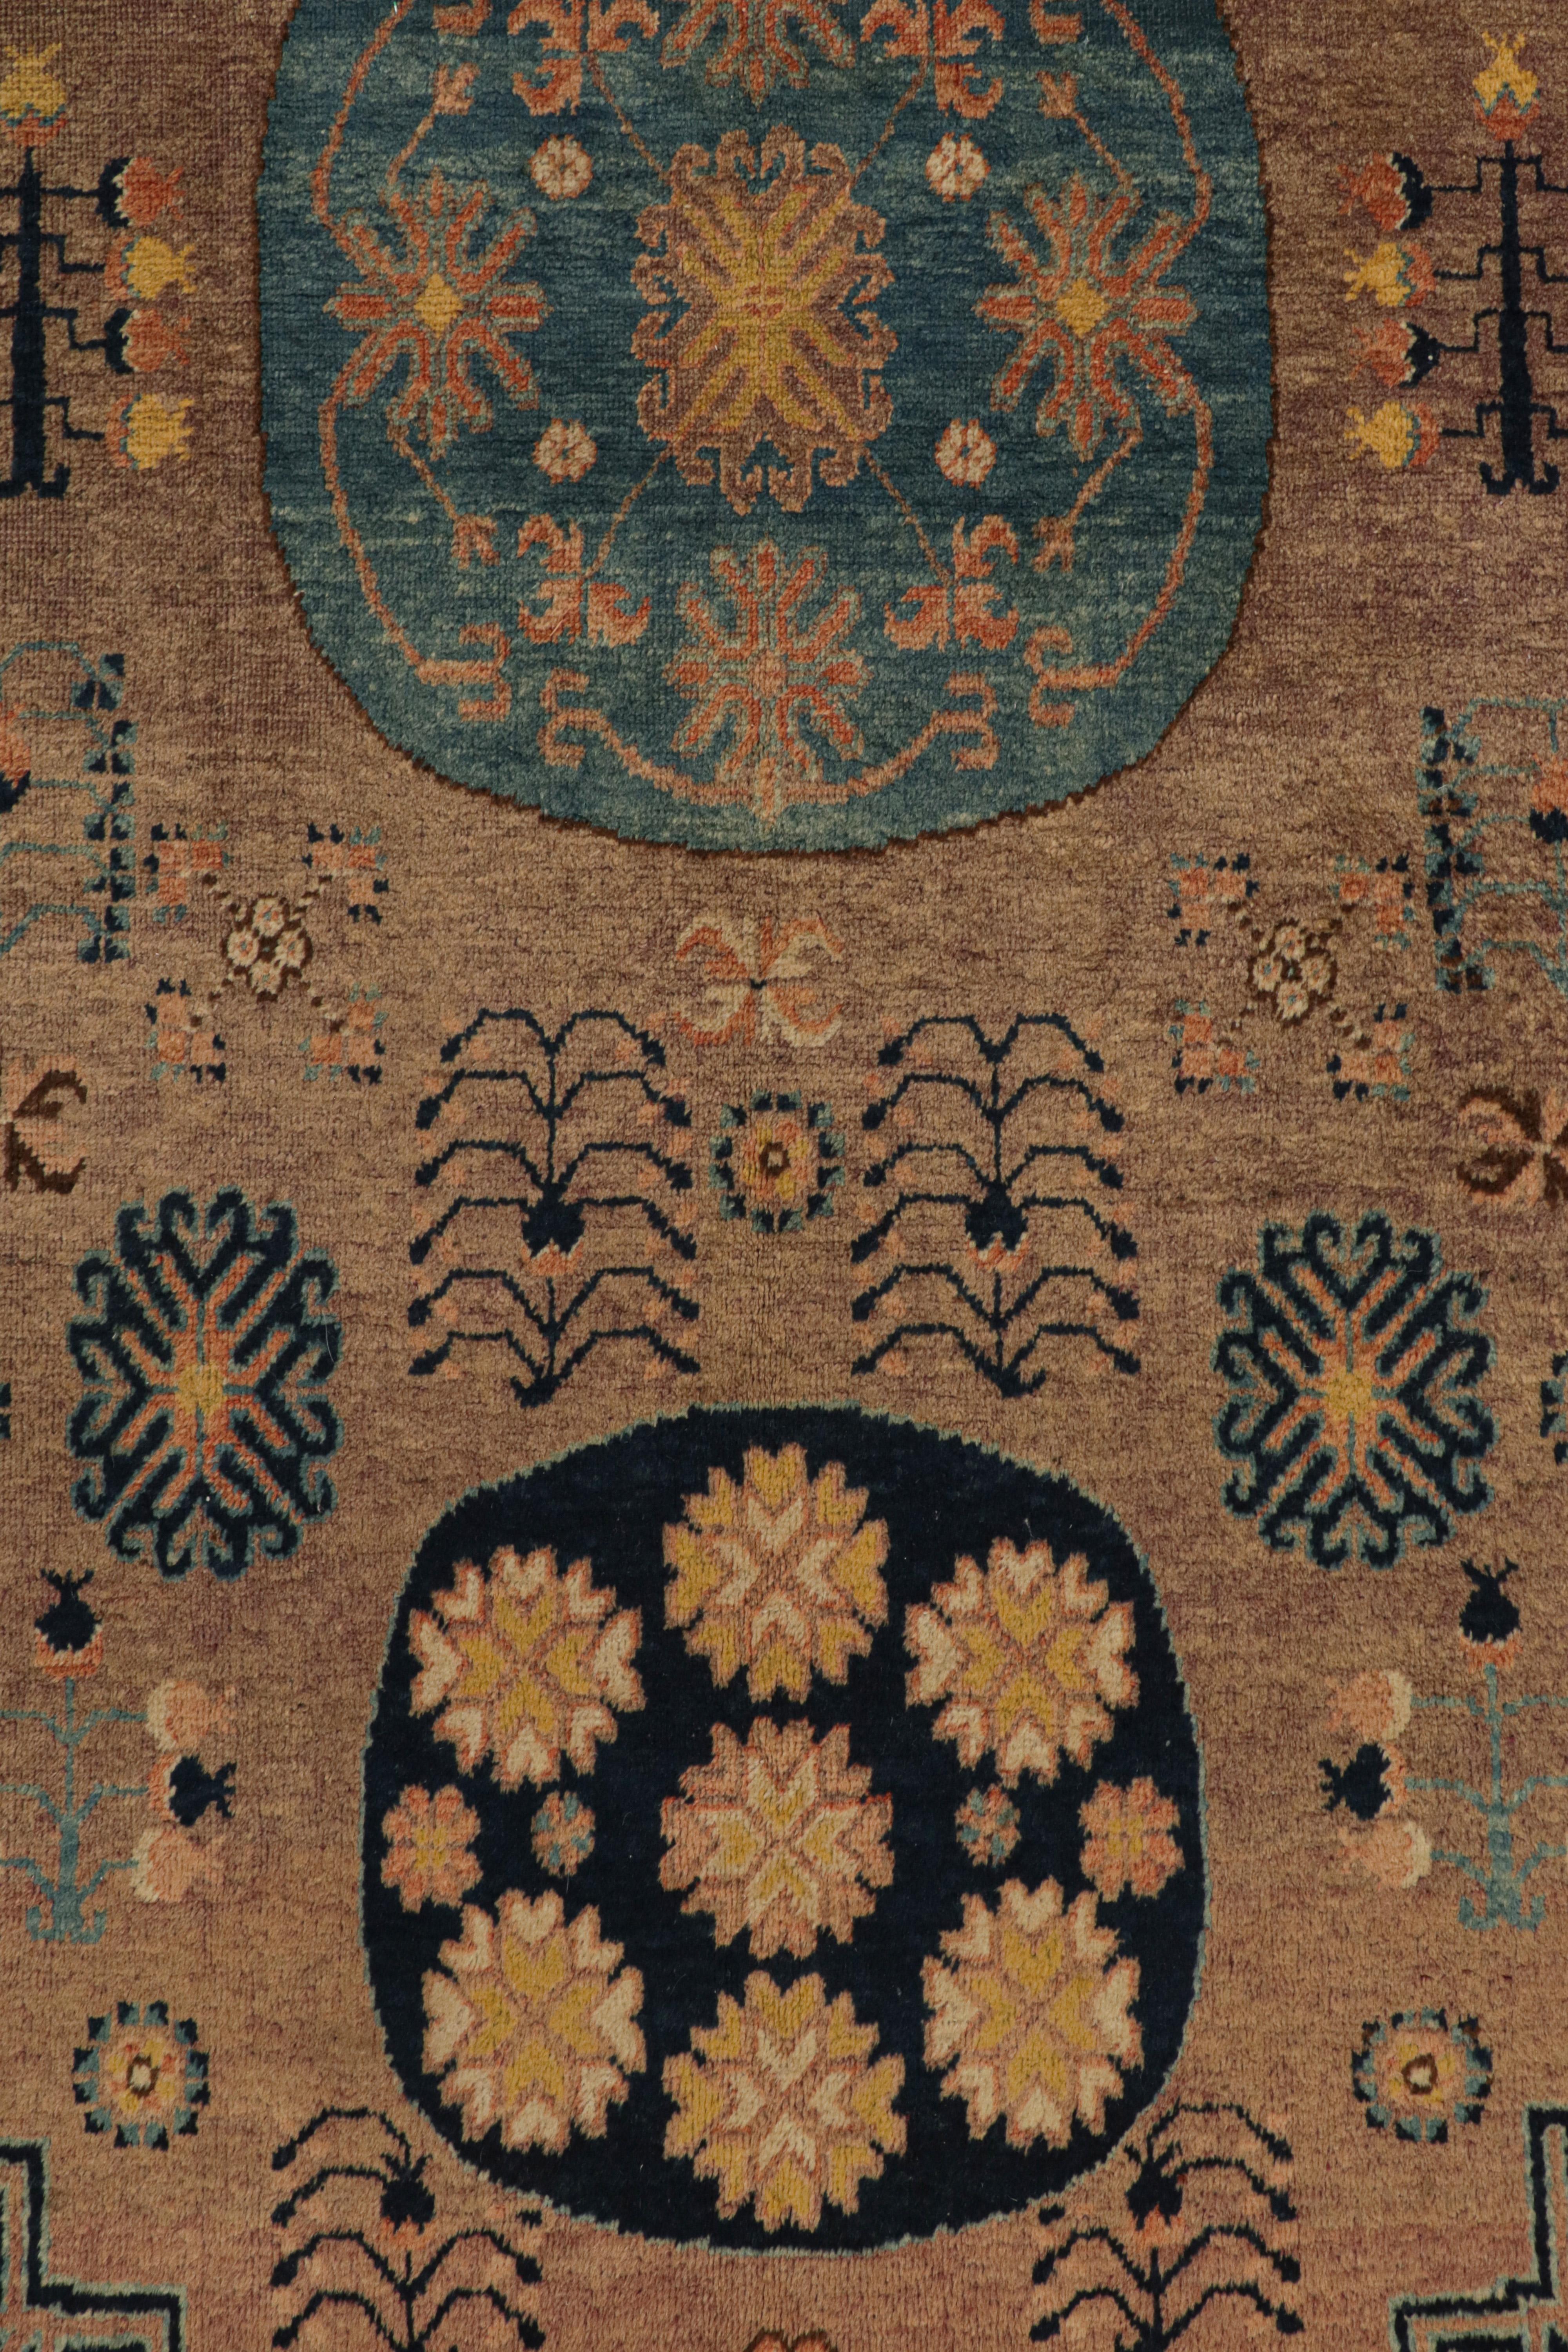 Early 20th Century Antique Khotan rug in Beige-Brown, Blue & Gold Medallions, from Rug & Kilim For Sale